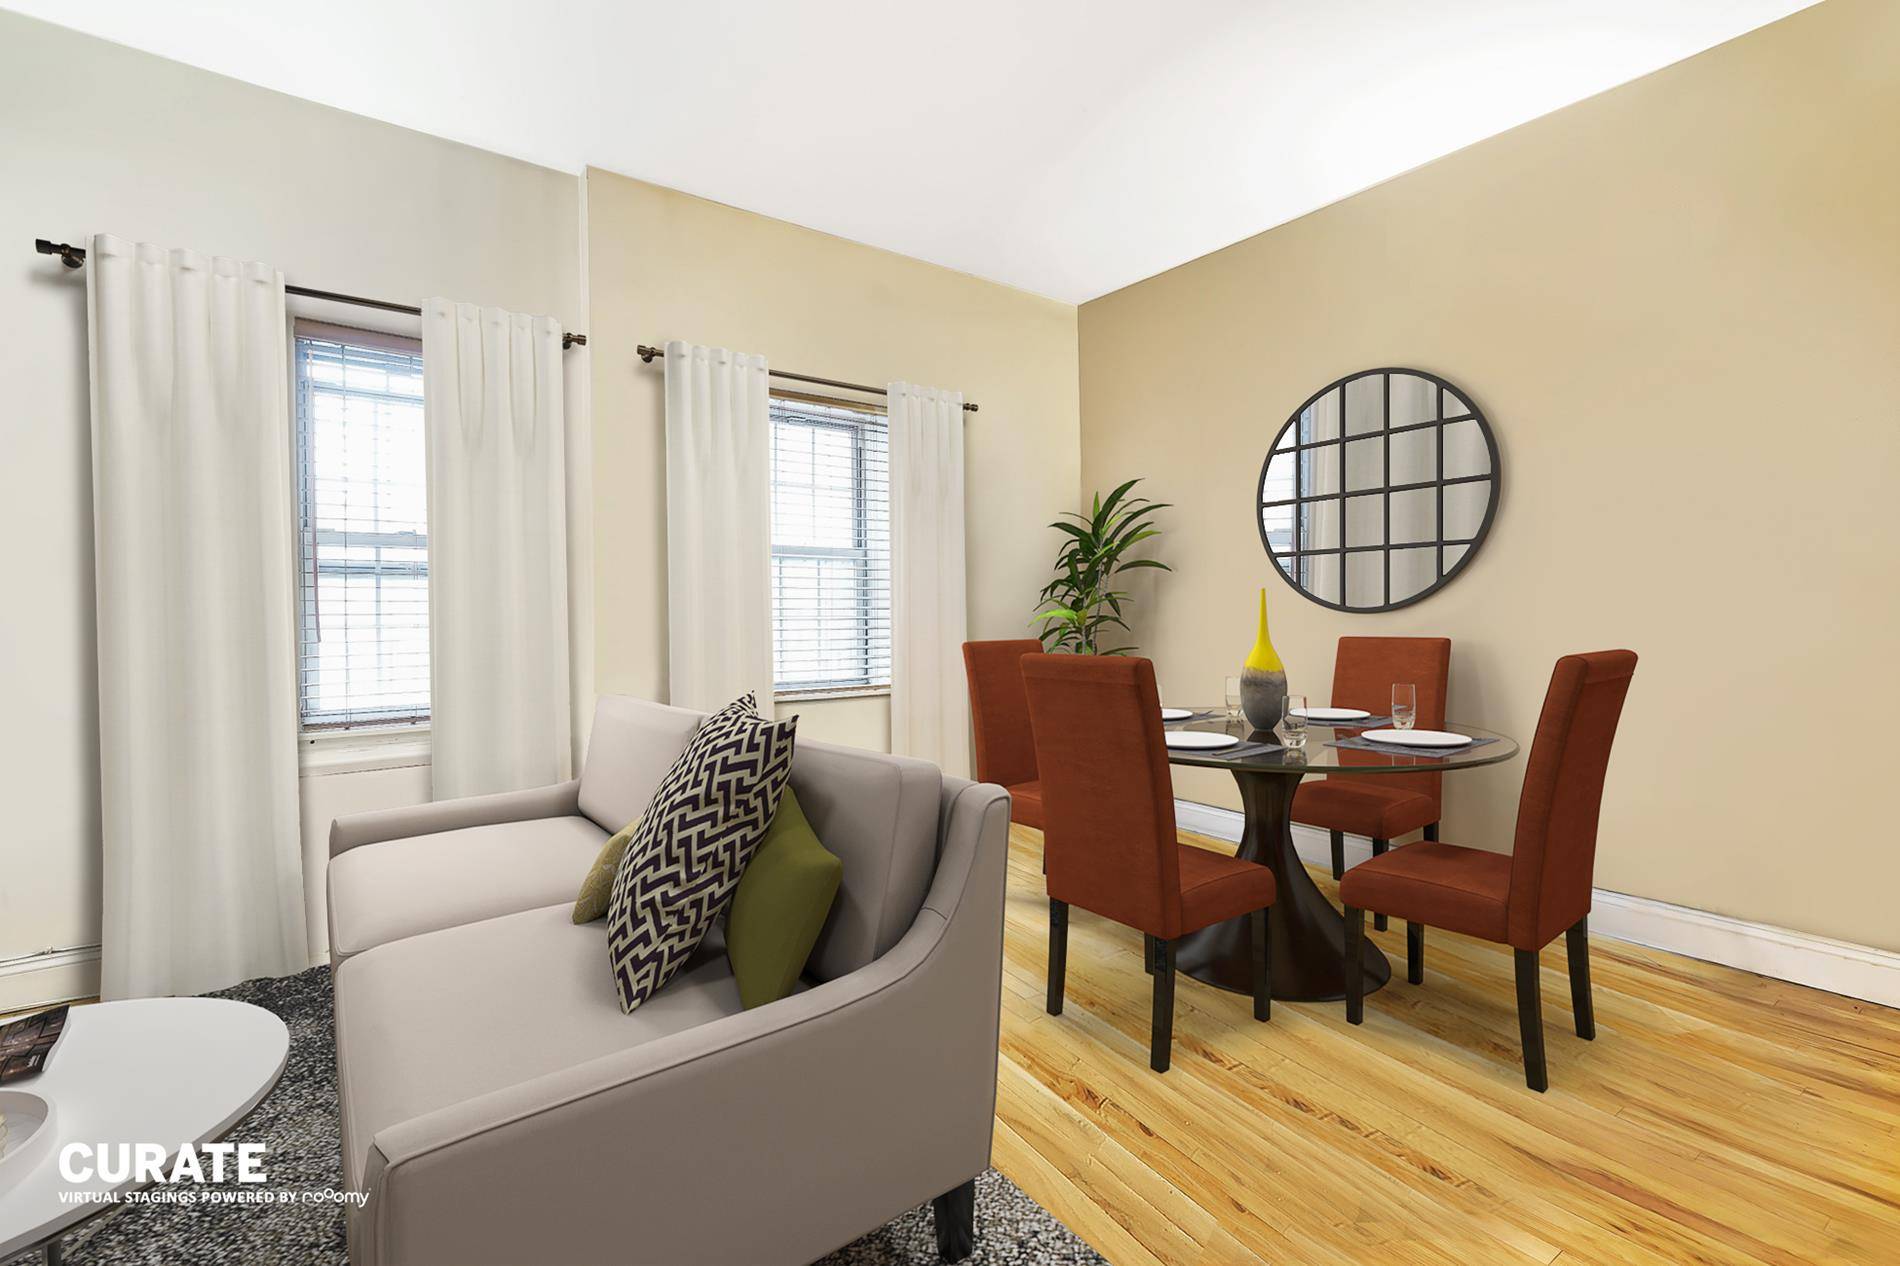 Spacious 600 sq ft 1 bedroom, 1 bathroom condominium nestled in thriving Bedford Stuyvesant ; shopping, restaurants and transit options couldn t be more conveniently located near this sought after ...